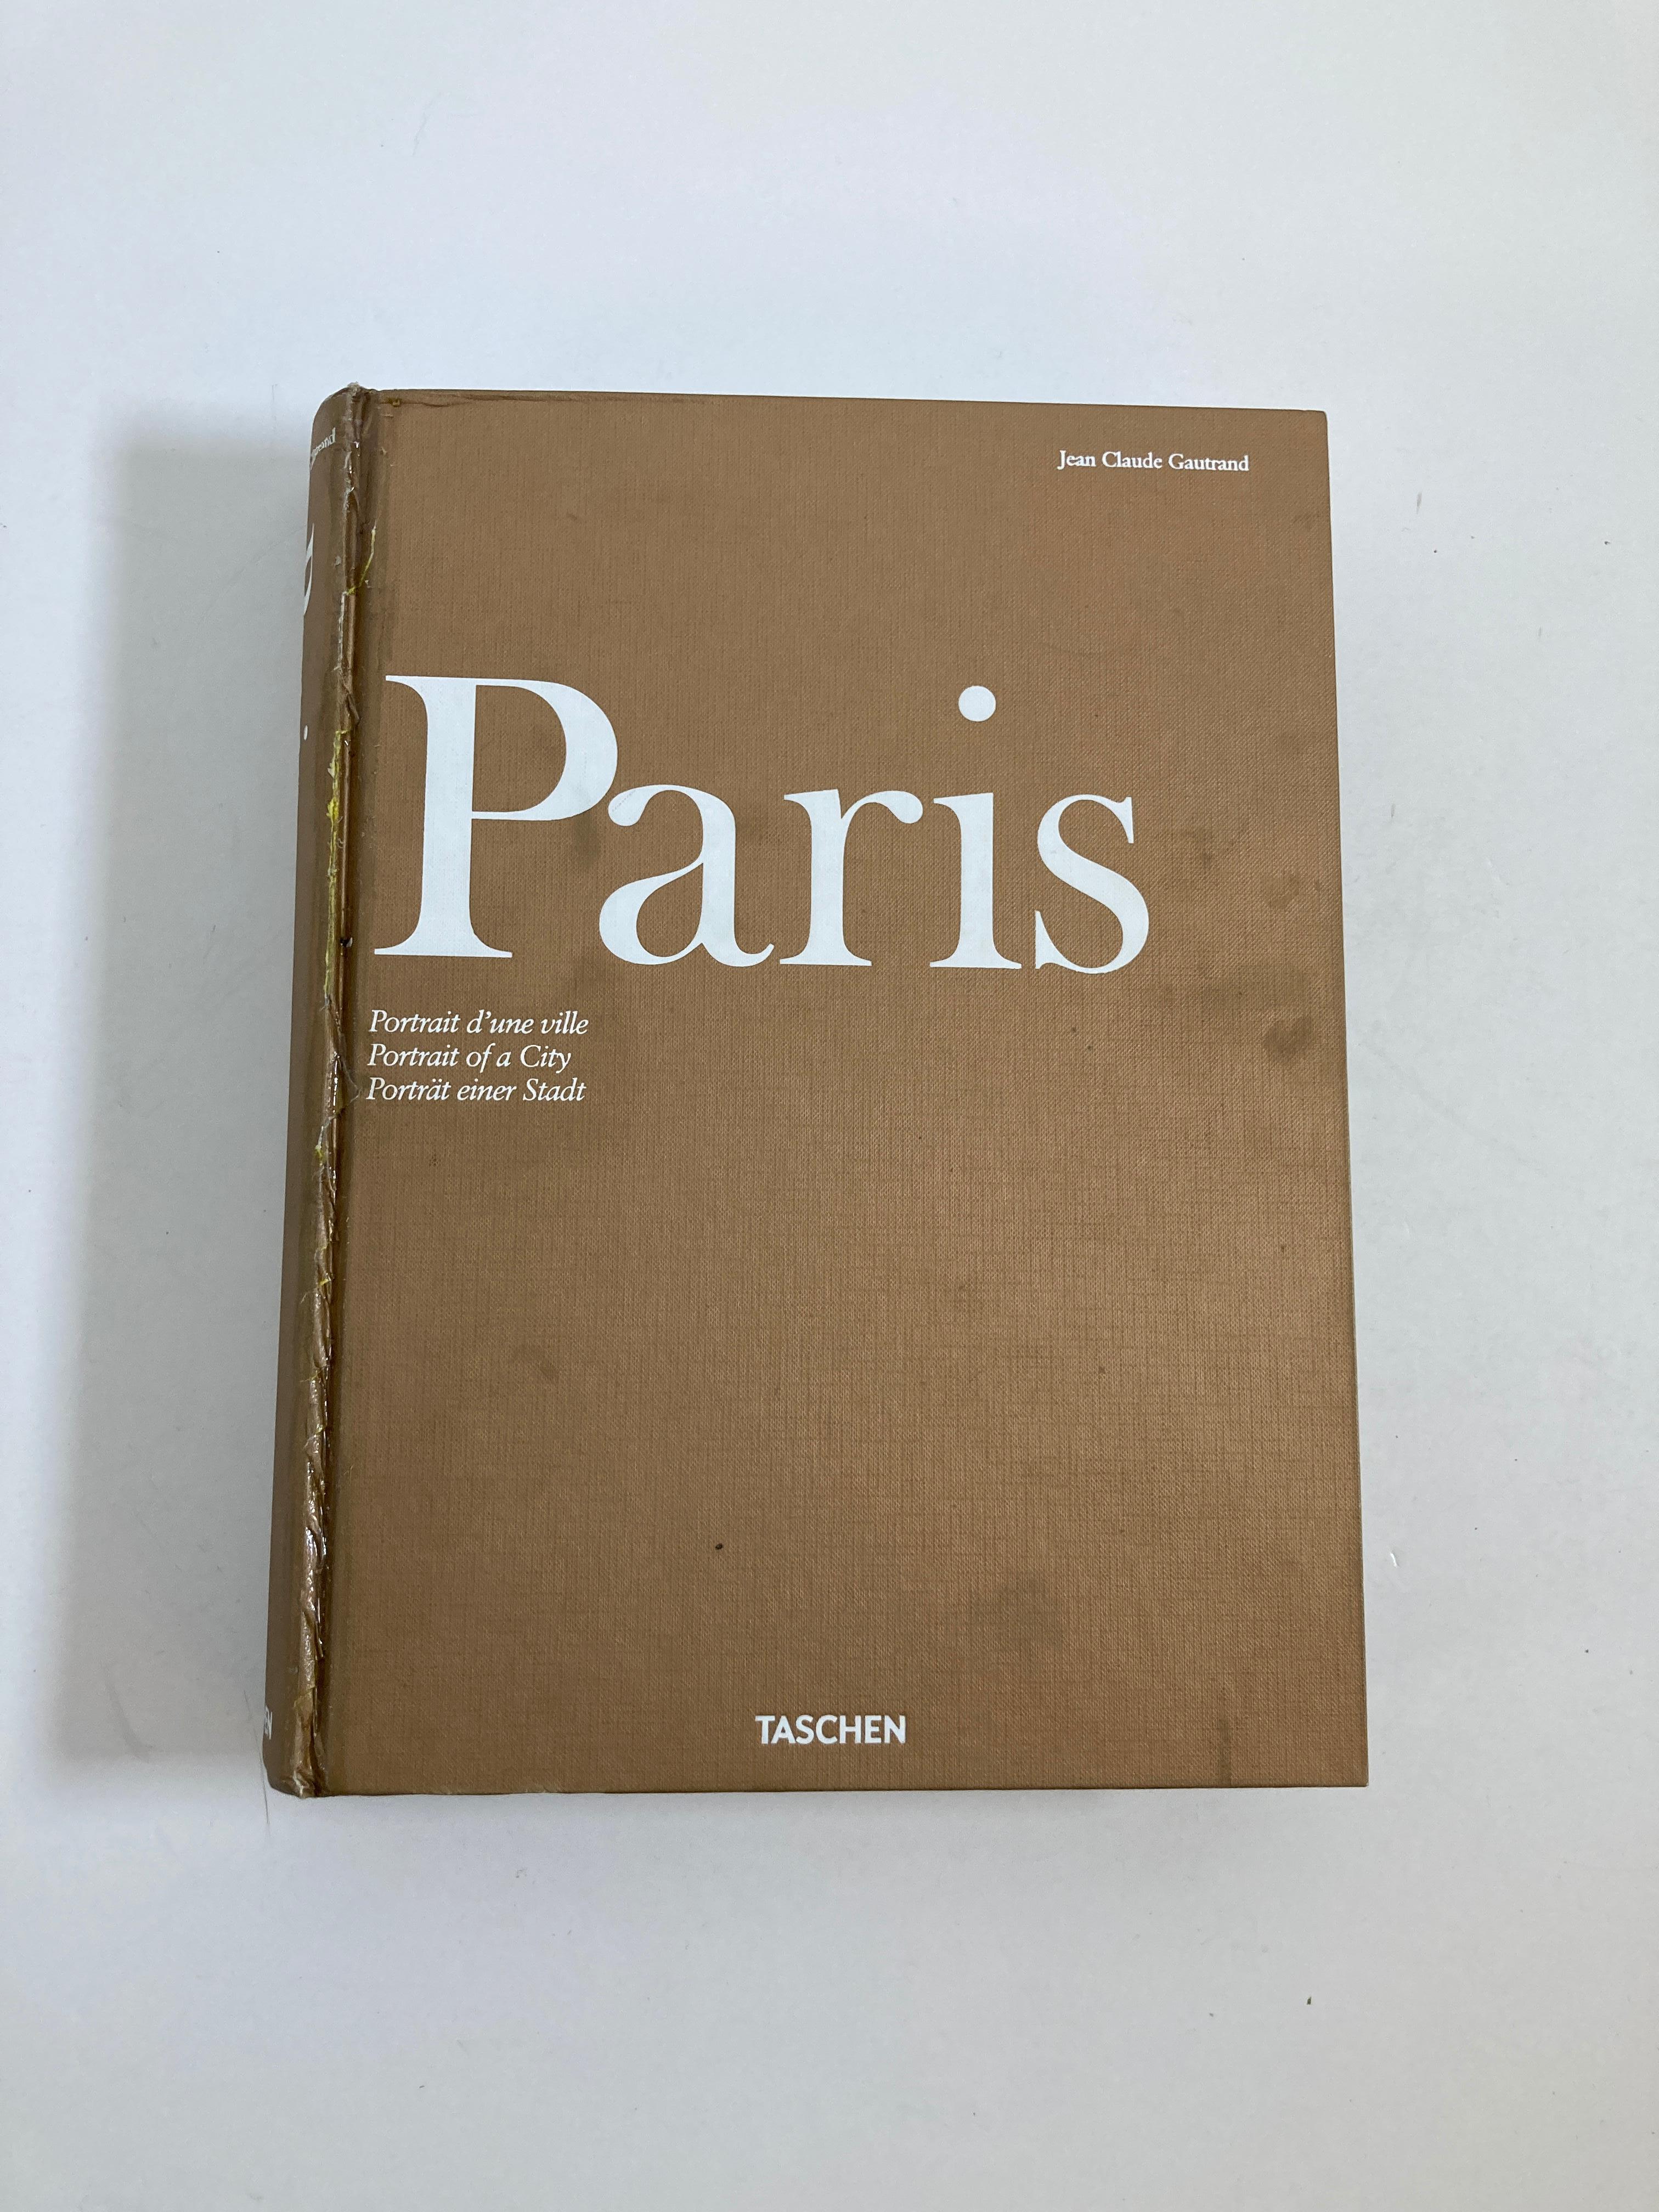 Paris. Portrait of a City Tashen hardcover book.
Built on two millennia of history, Paris is as much a city to fall in love with as a city to photograph. This visual companion to the French metropolis brings together the chic spirit of the city